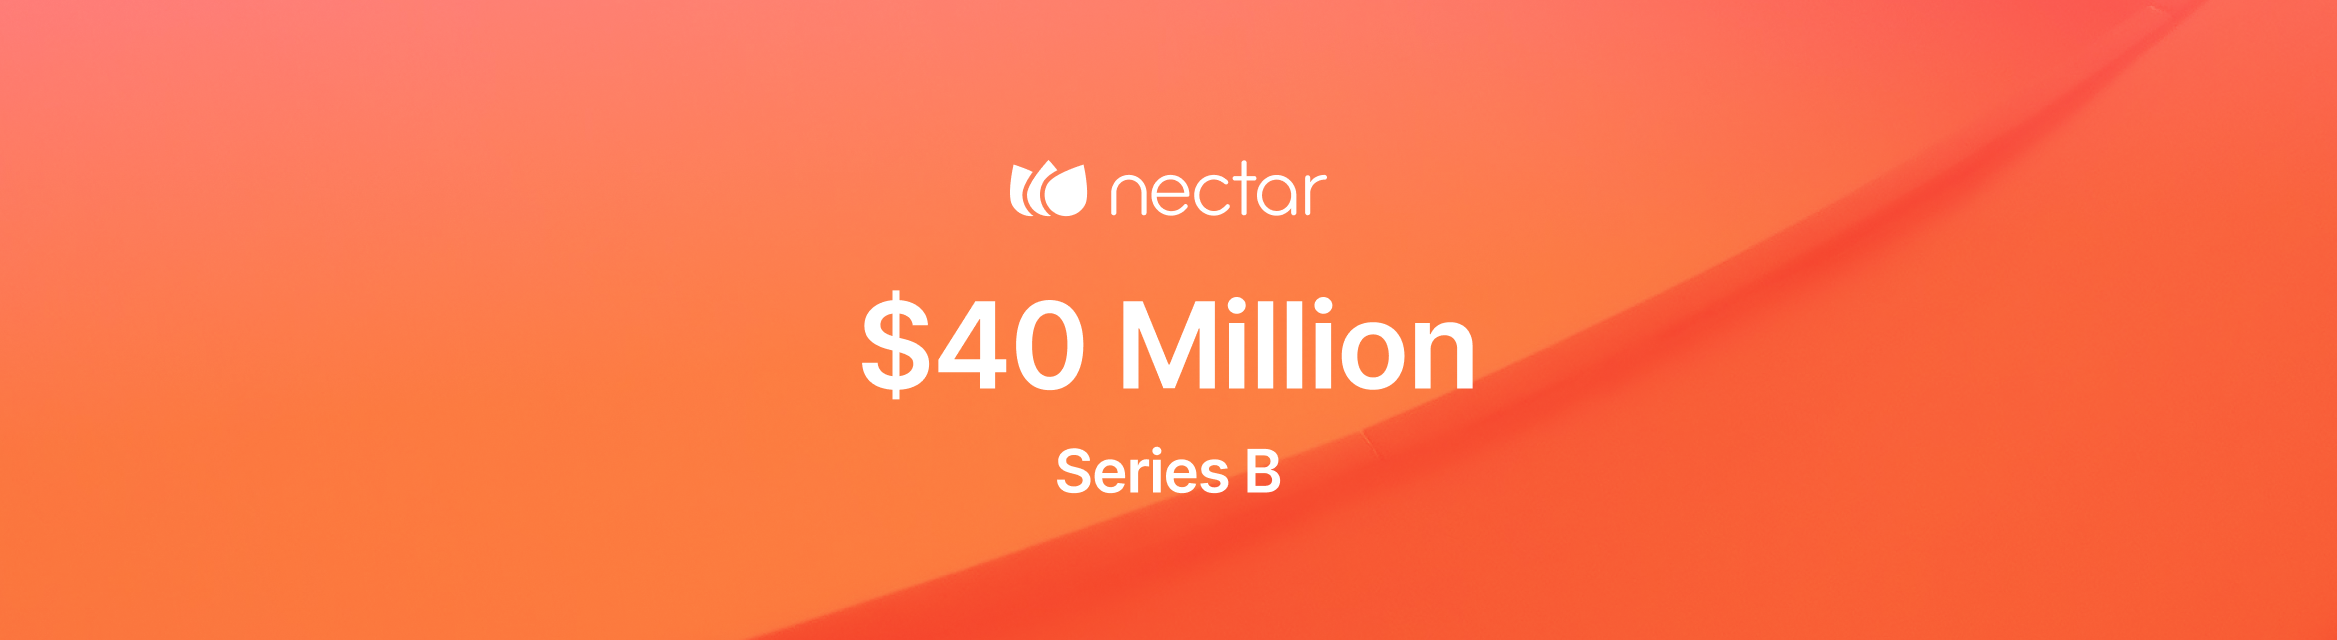 Nectar Announces $40 Million in Series B Committed Funding to Expand Culture Platform